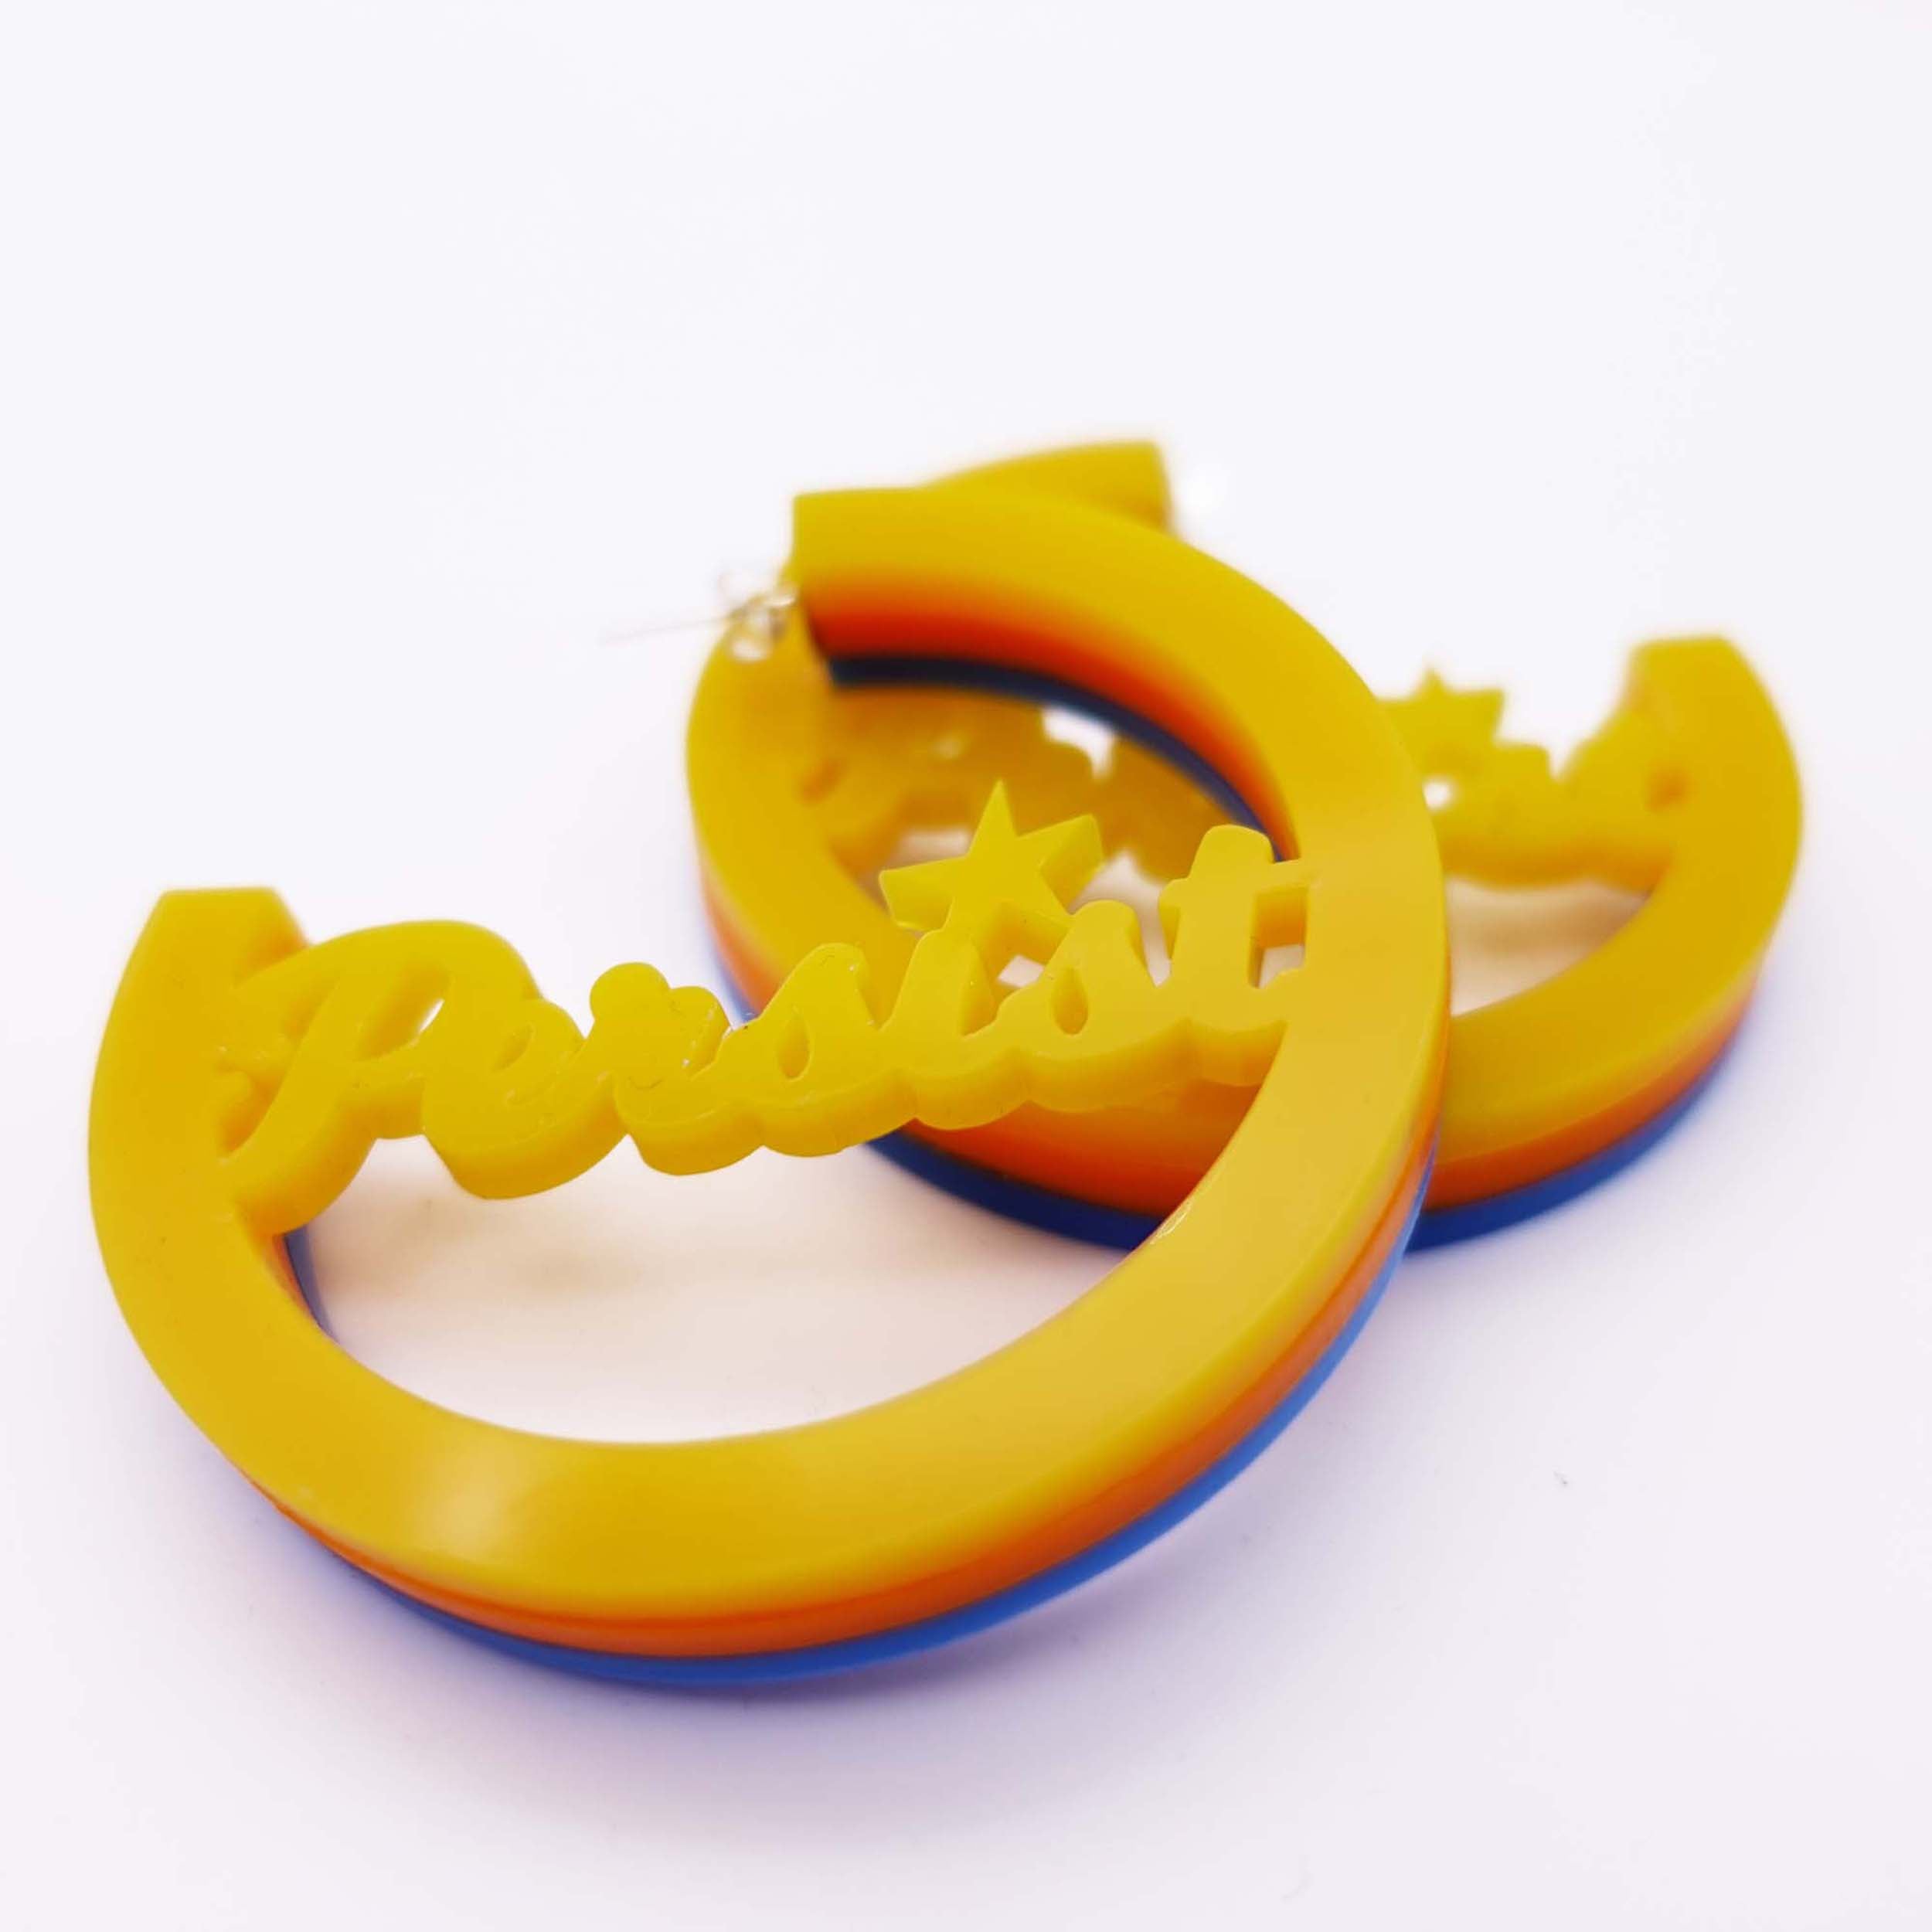 Resist and Persist statement hoop earrings in Sunflower yellow, orange and blue. Join the Resisterhood. Fight for the Persisterhood! 